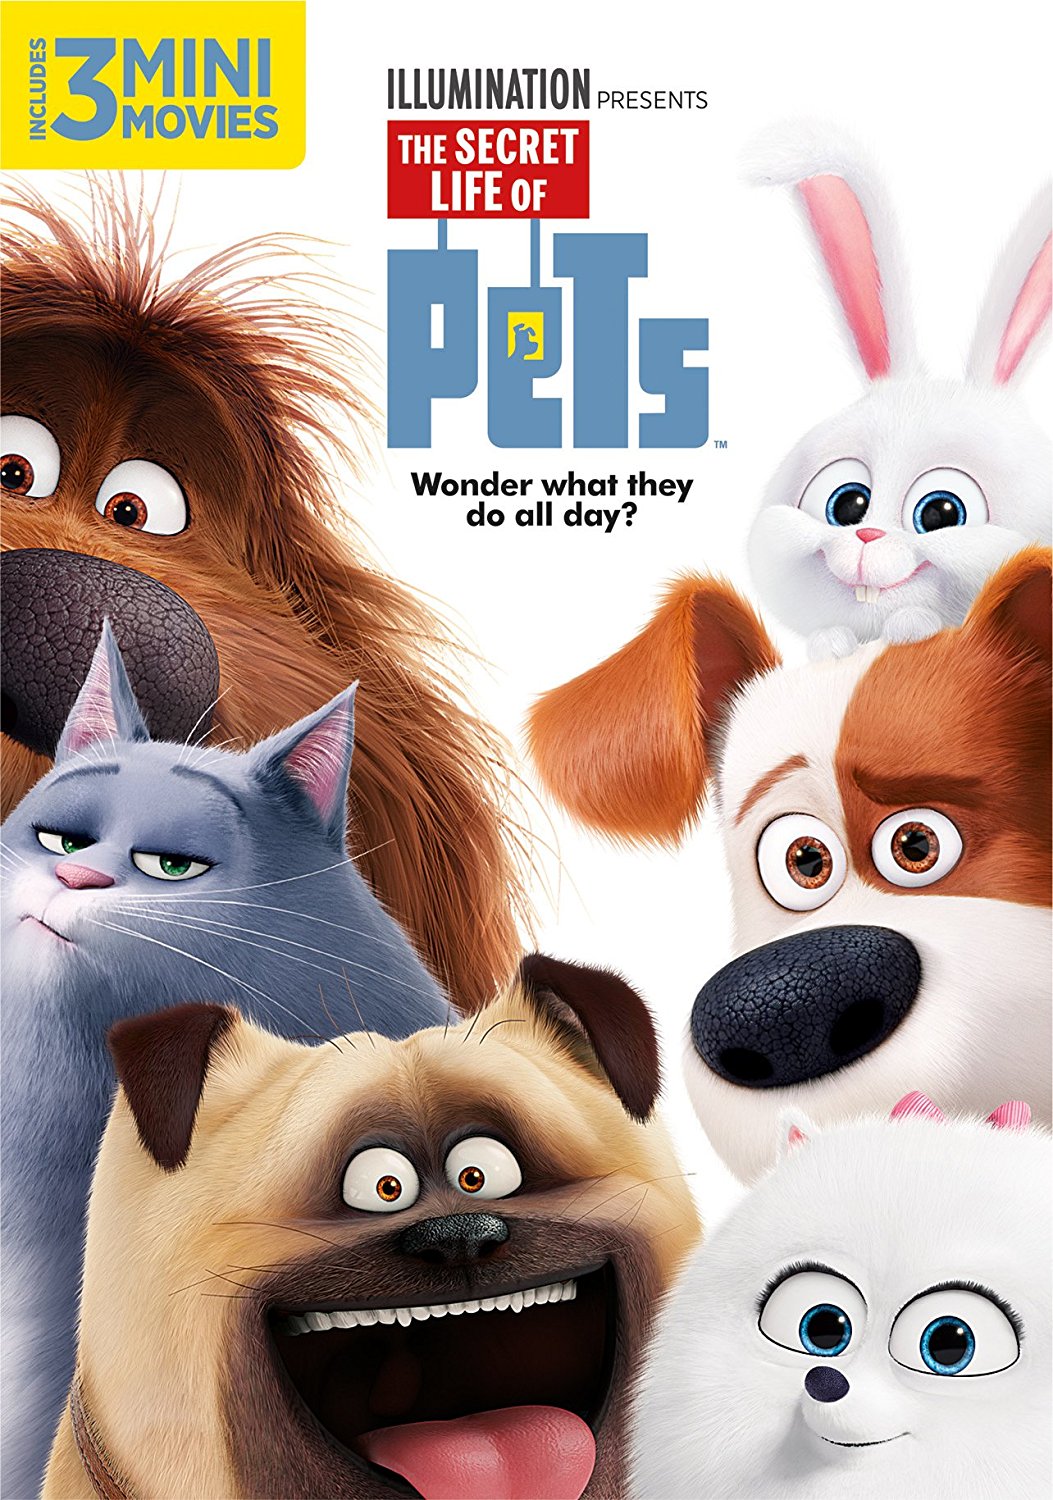 The Secret Life of Pets on DVD